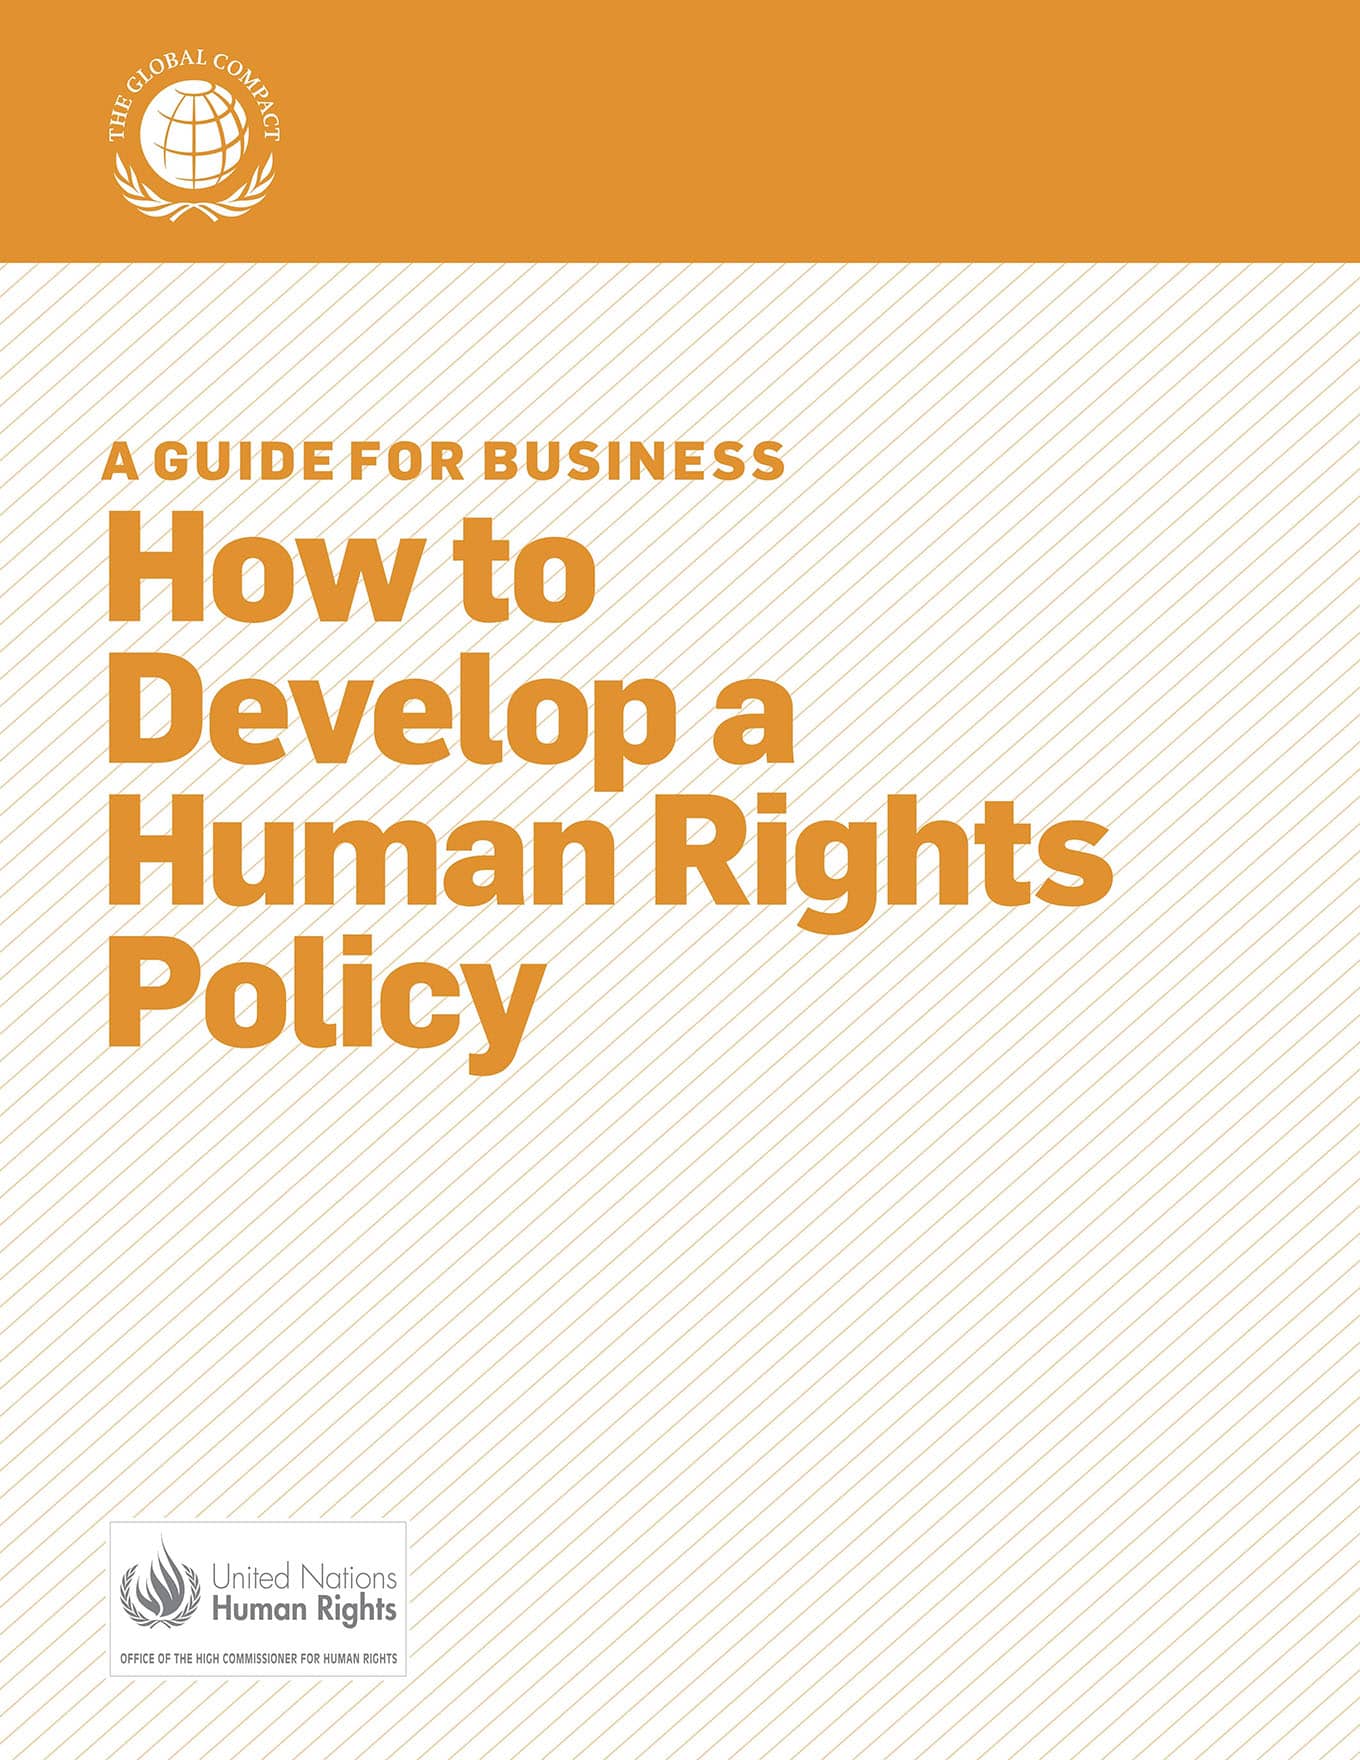 How to Develop a Human Rights Policy (OHCHR and UN Global Compact UNGC, 2011)